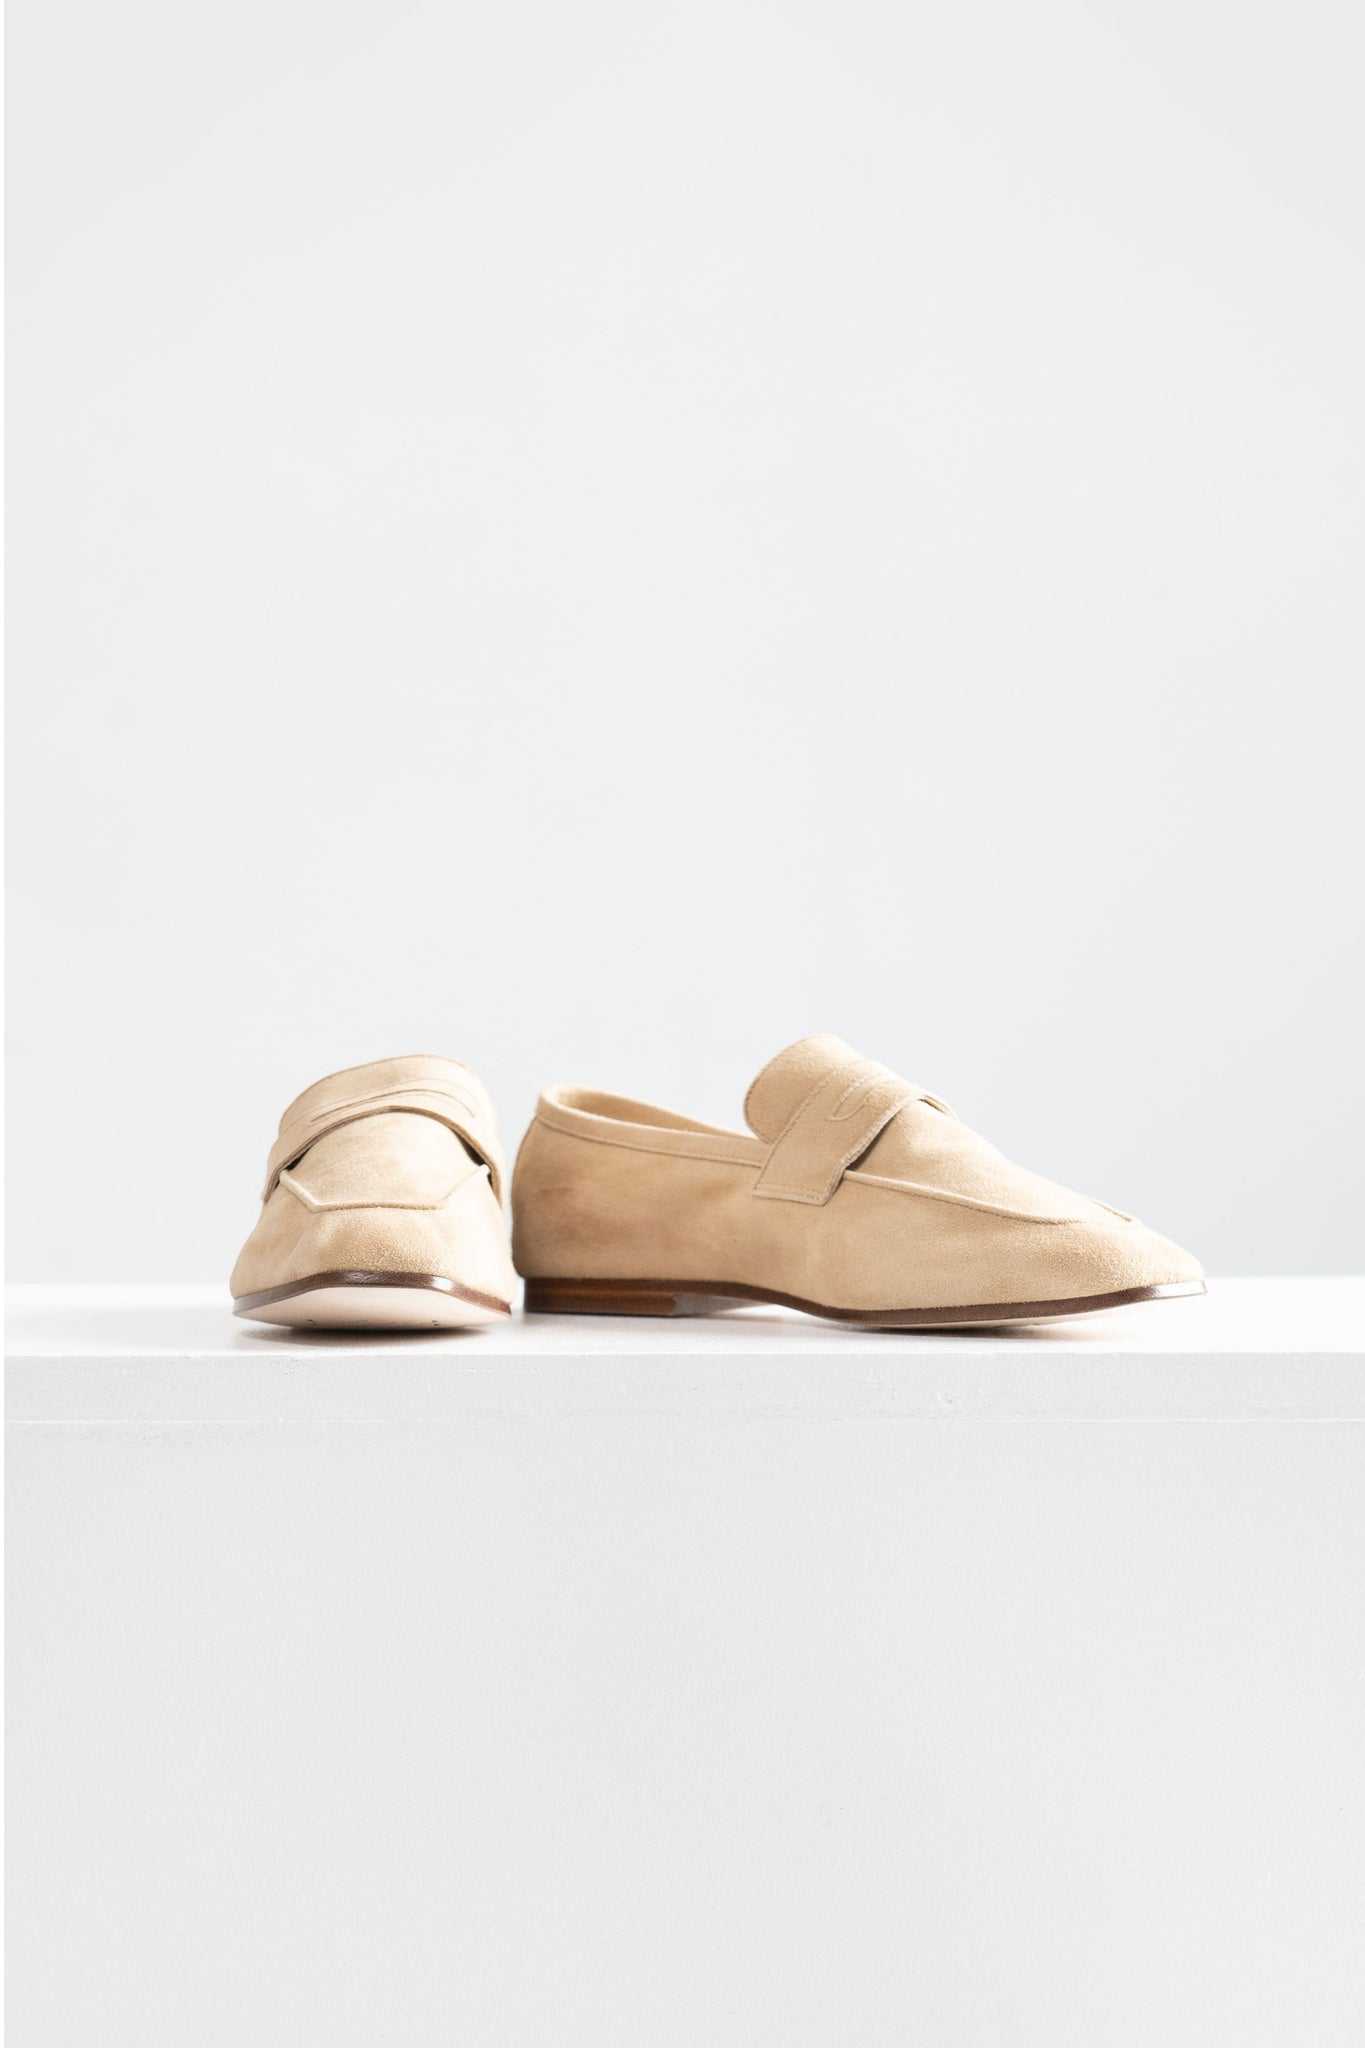 SOPHIQUE - Essenziale Classic Suede Loafer, Sand